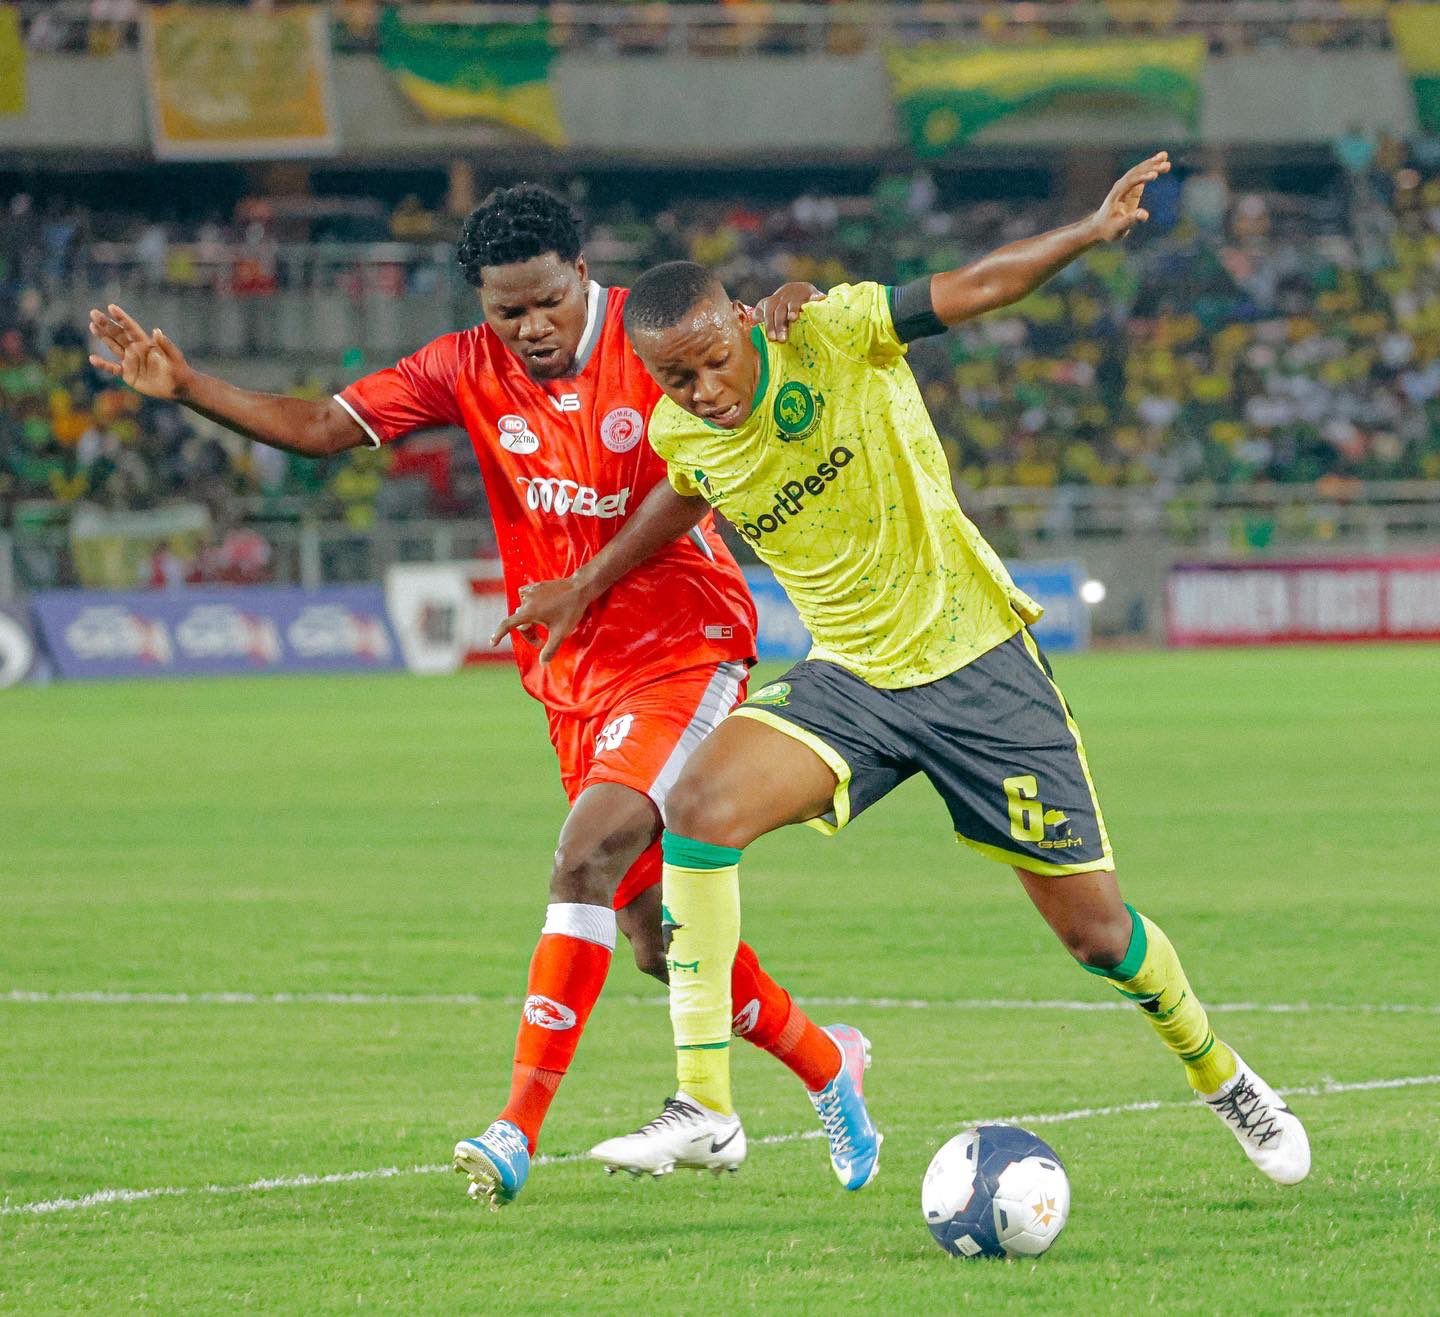 Coastal Union vs Young Africans Predictions, Betting Tips & Odds │20 AUGUST, 2022